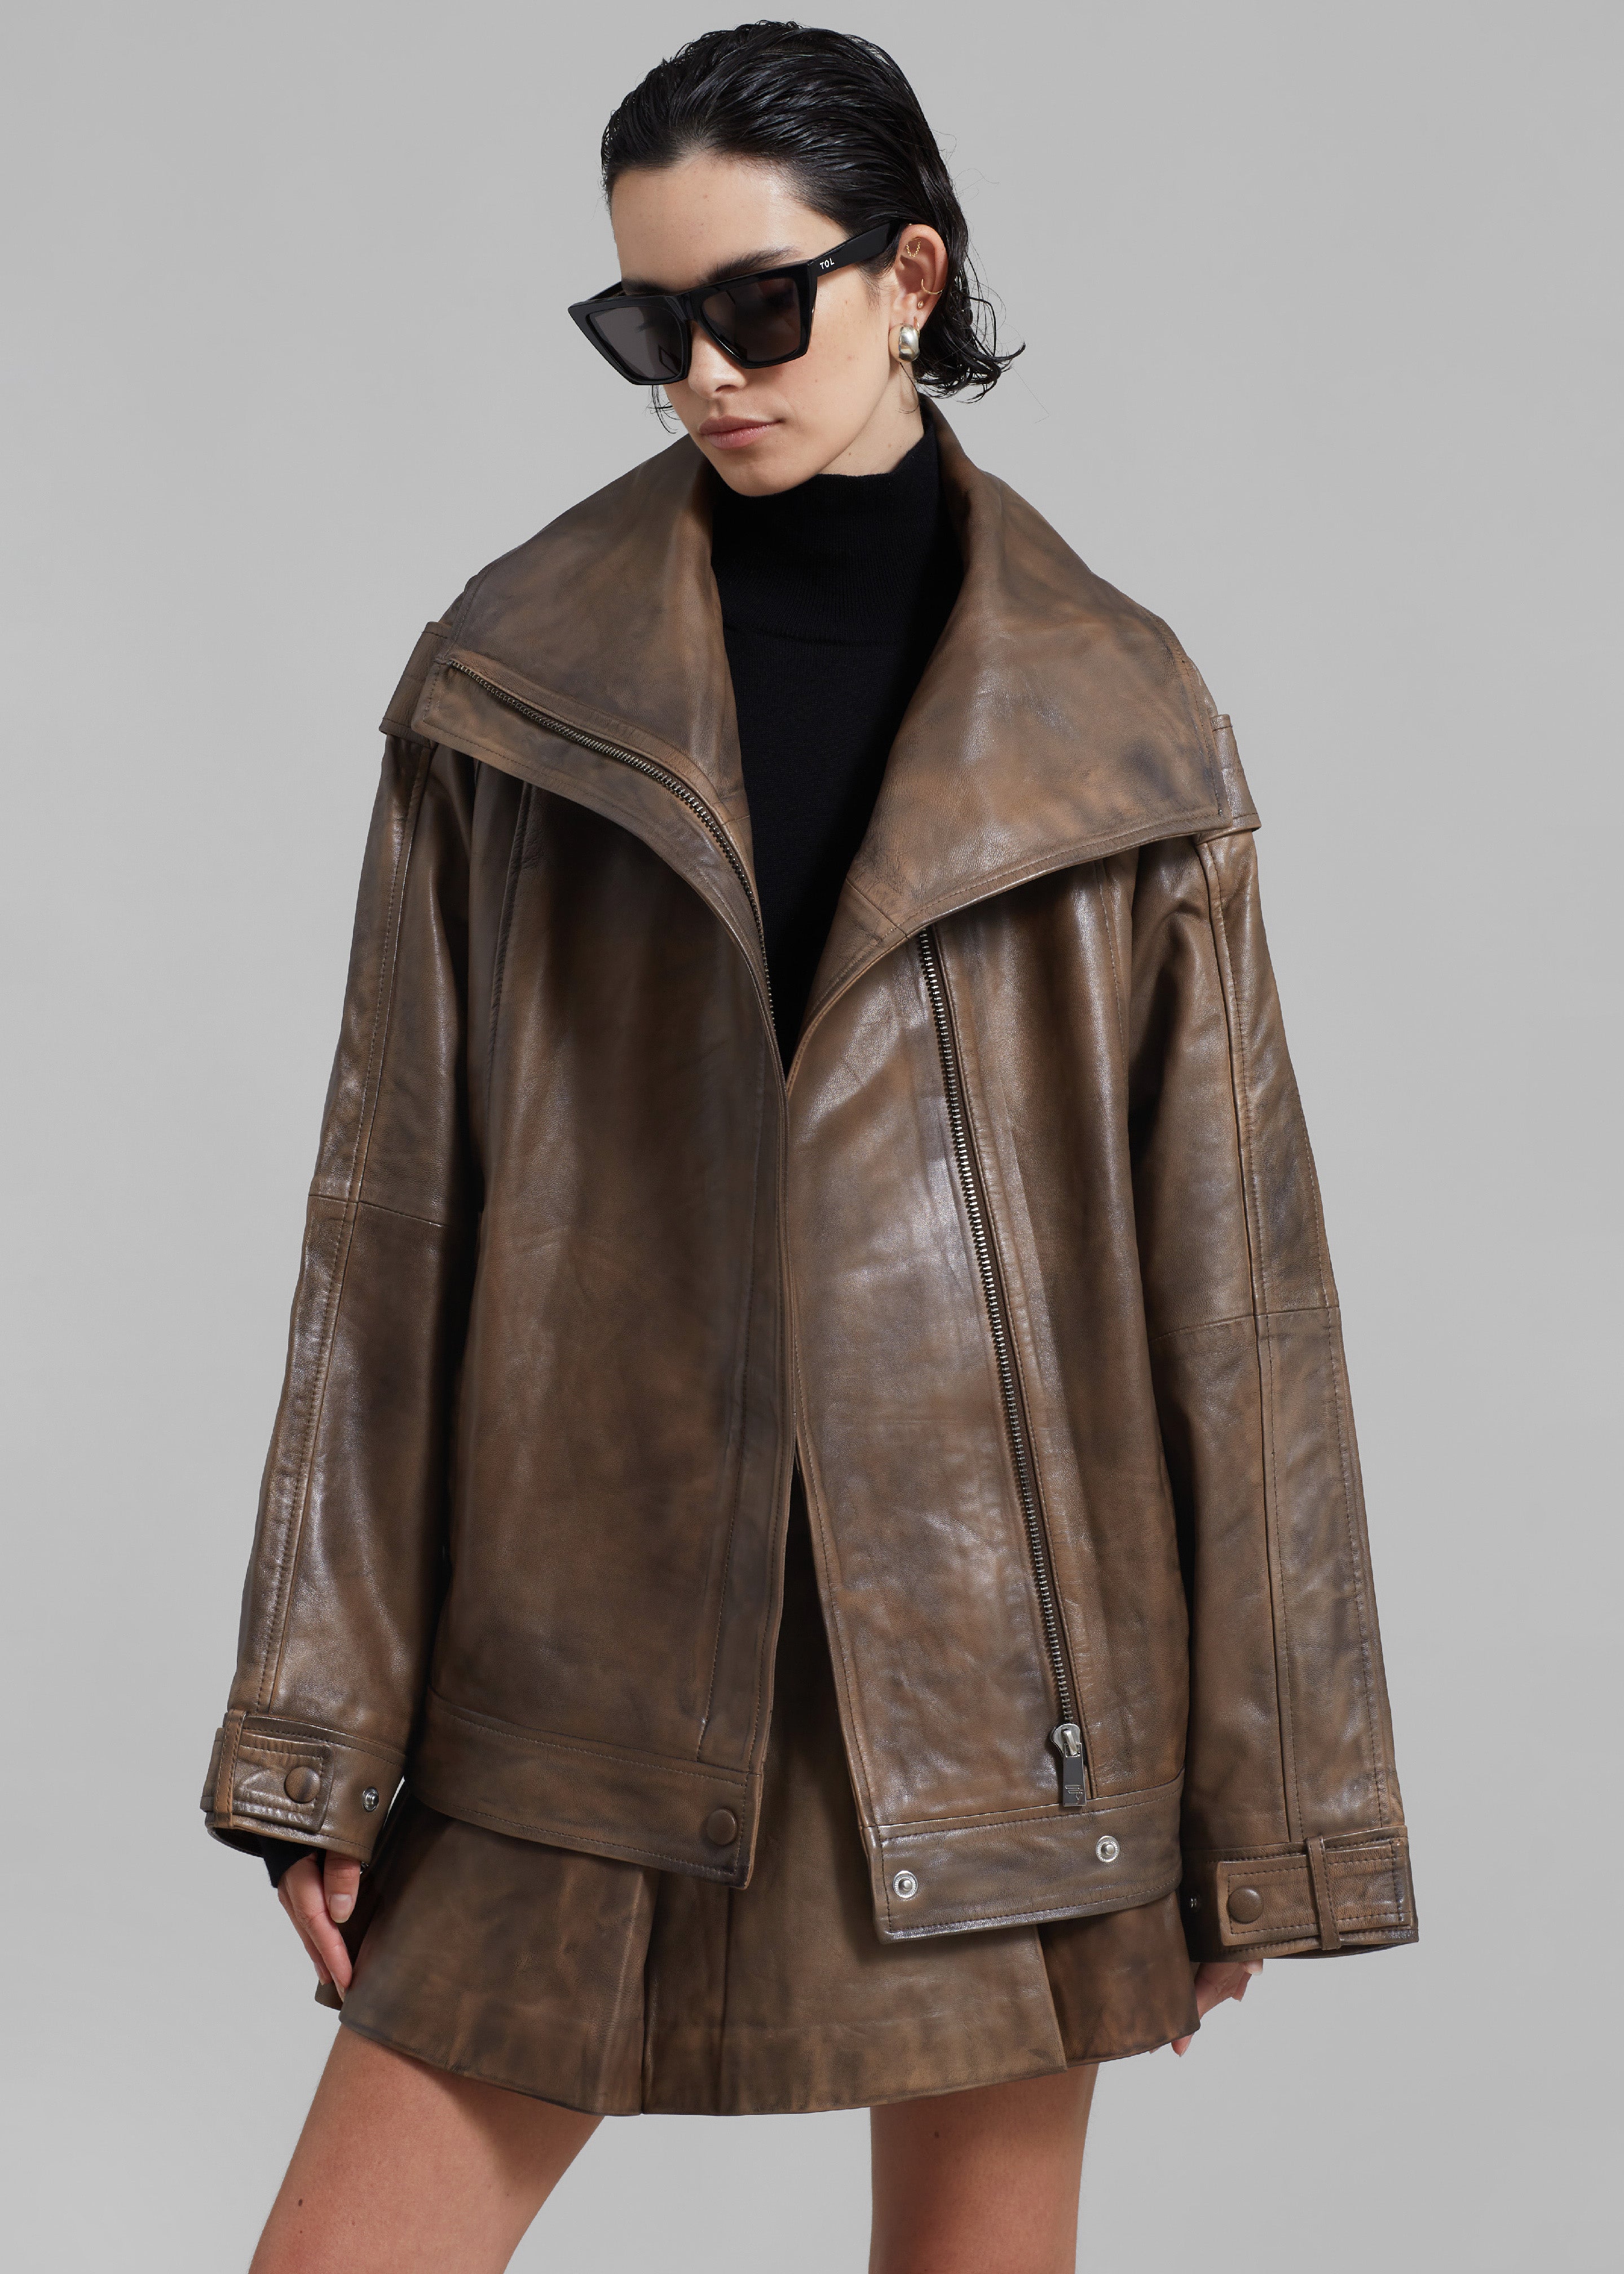 REMAIN Leather Oversized Jacket - Brown Sugar Comb - 5